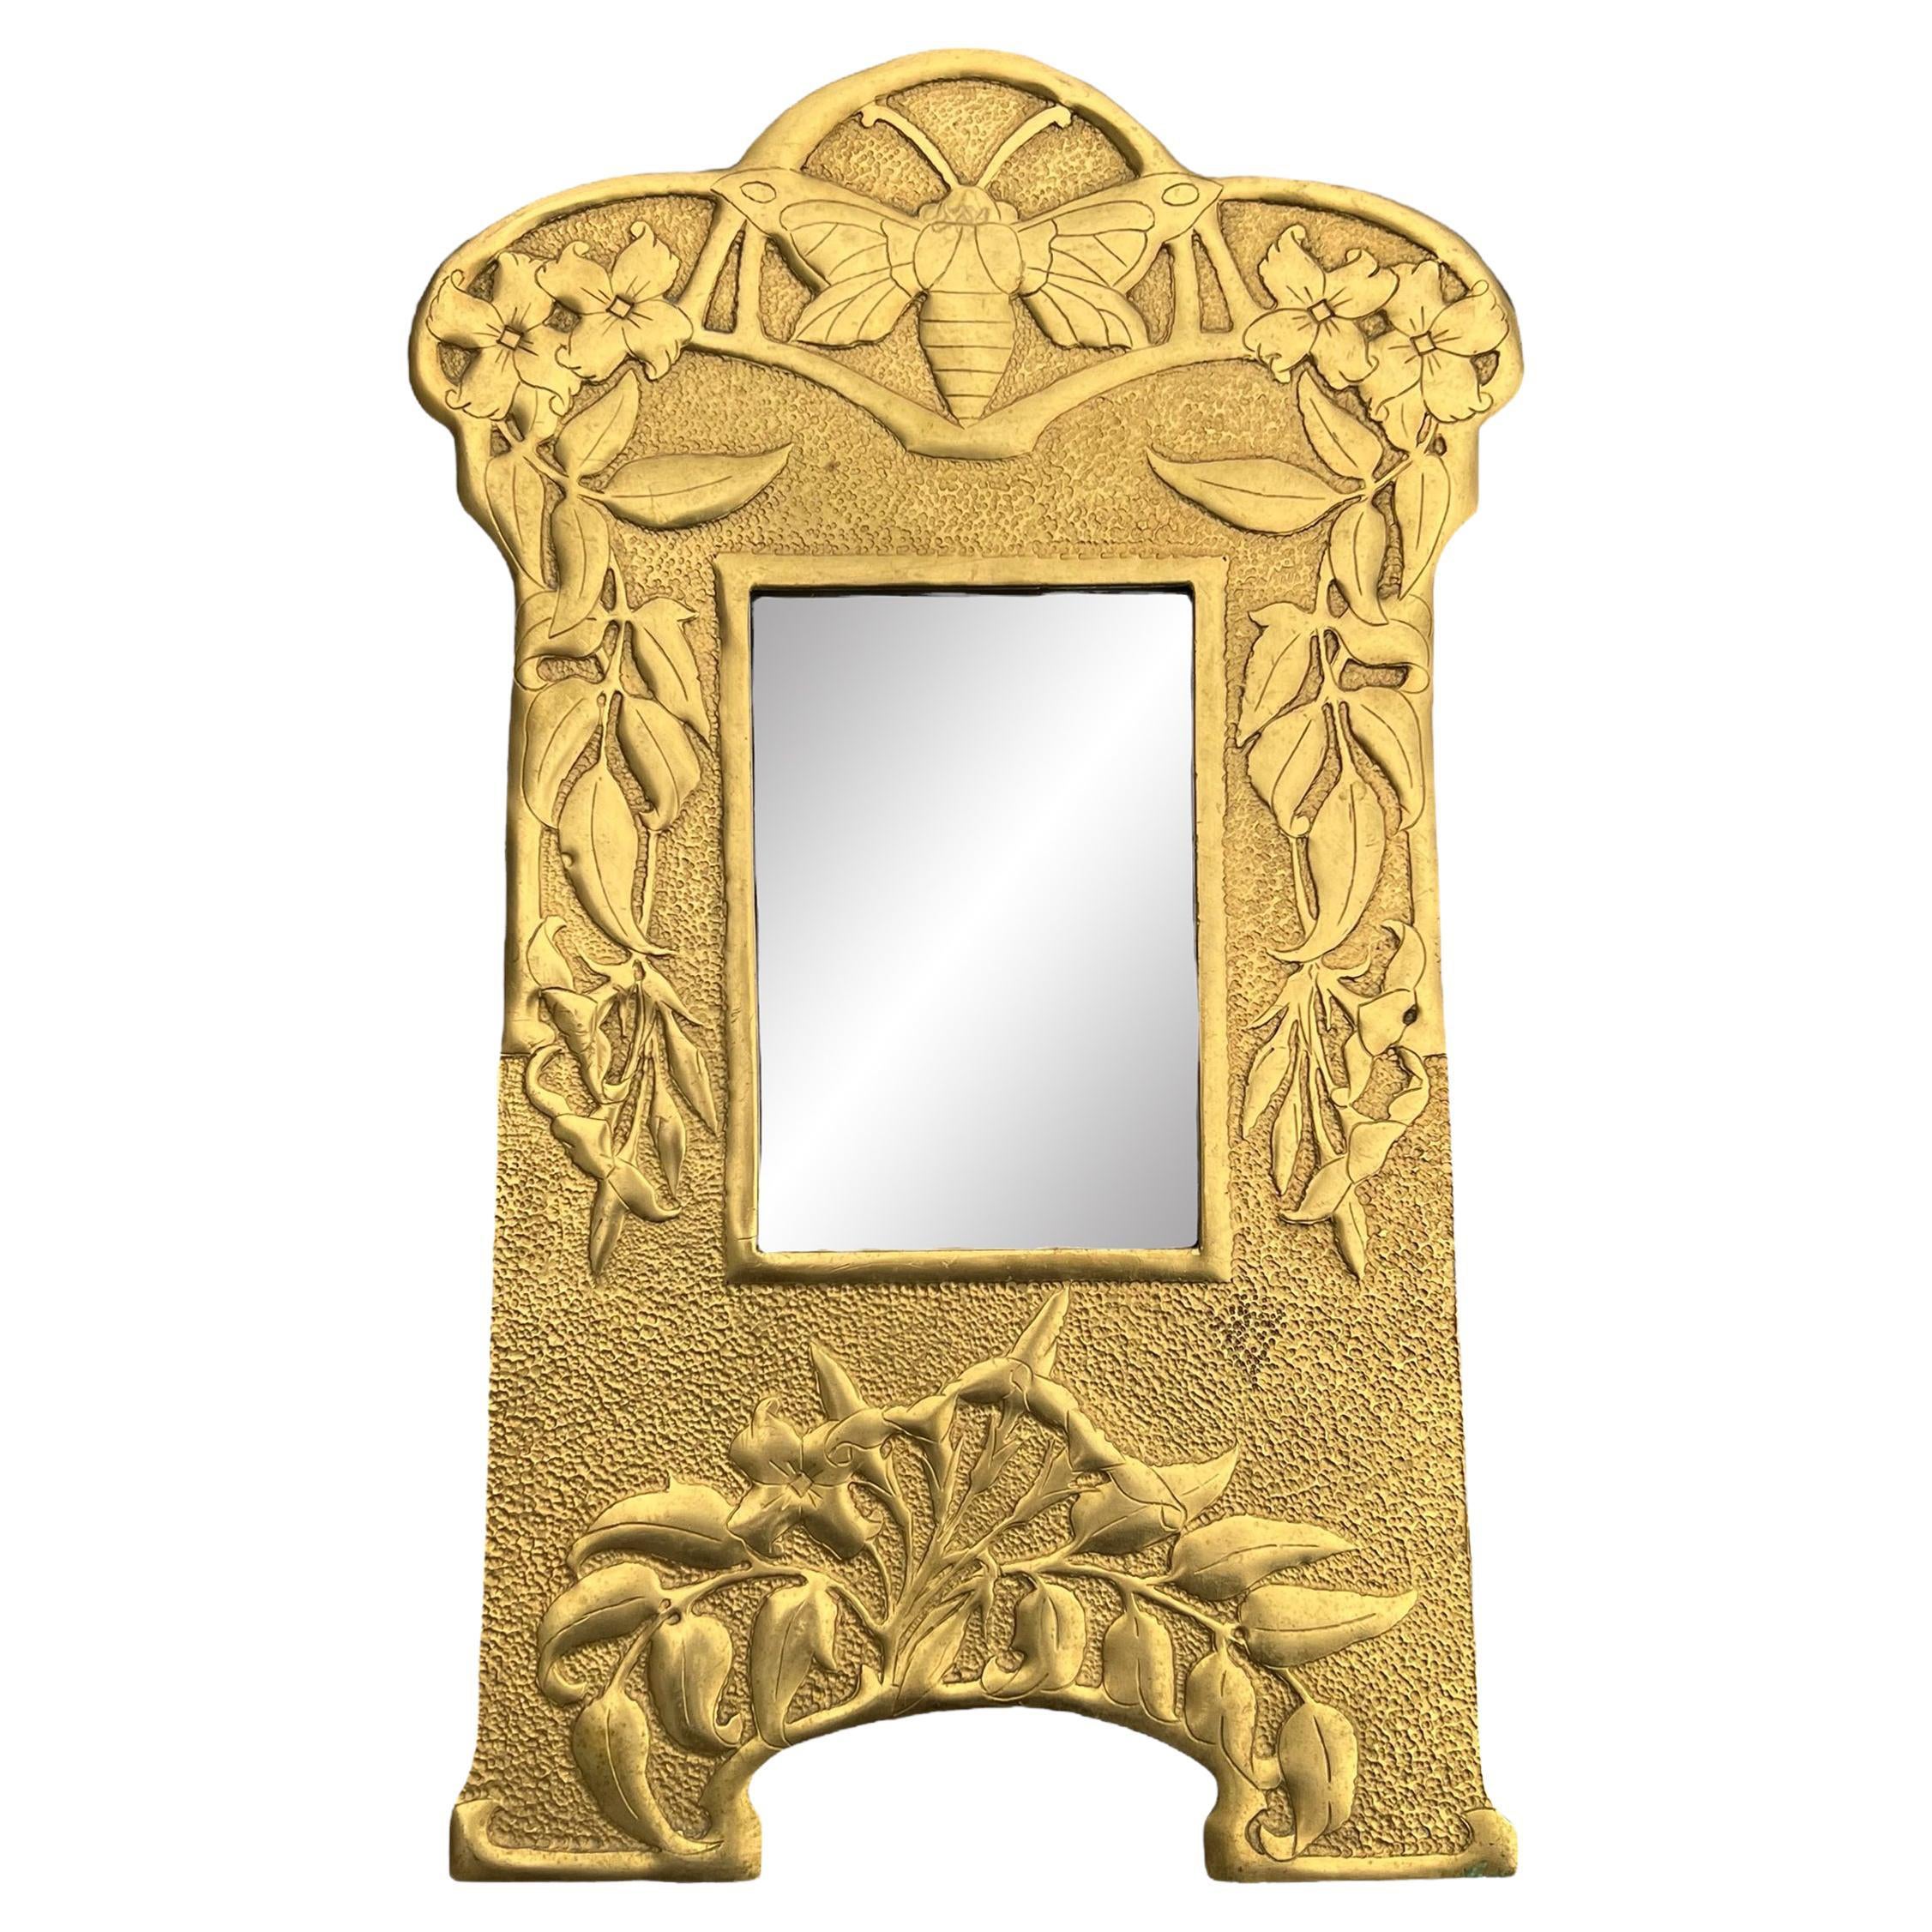 Early 20th Century English Art Nouveau Brass Framed Mirror